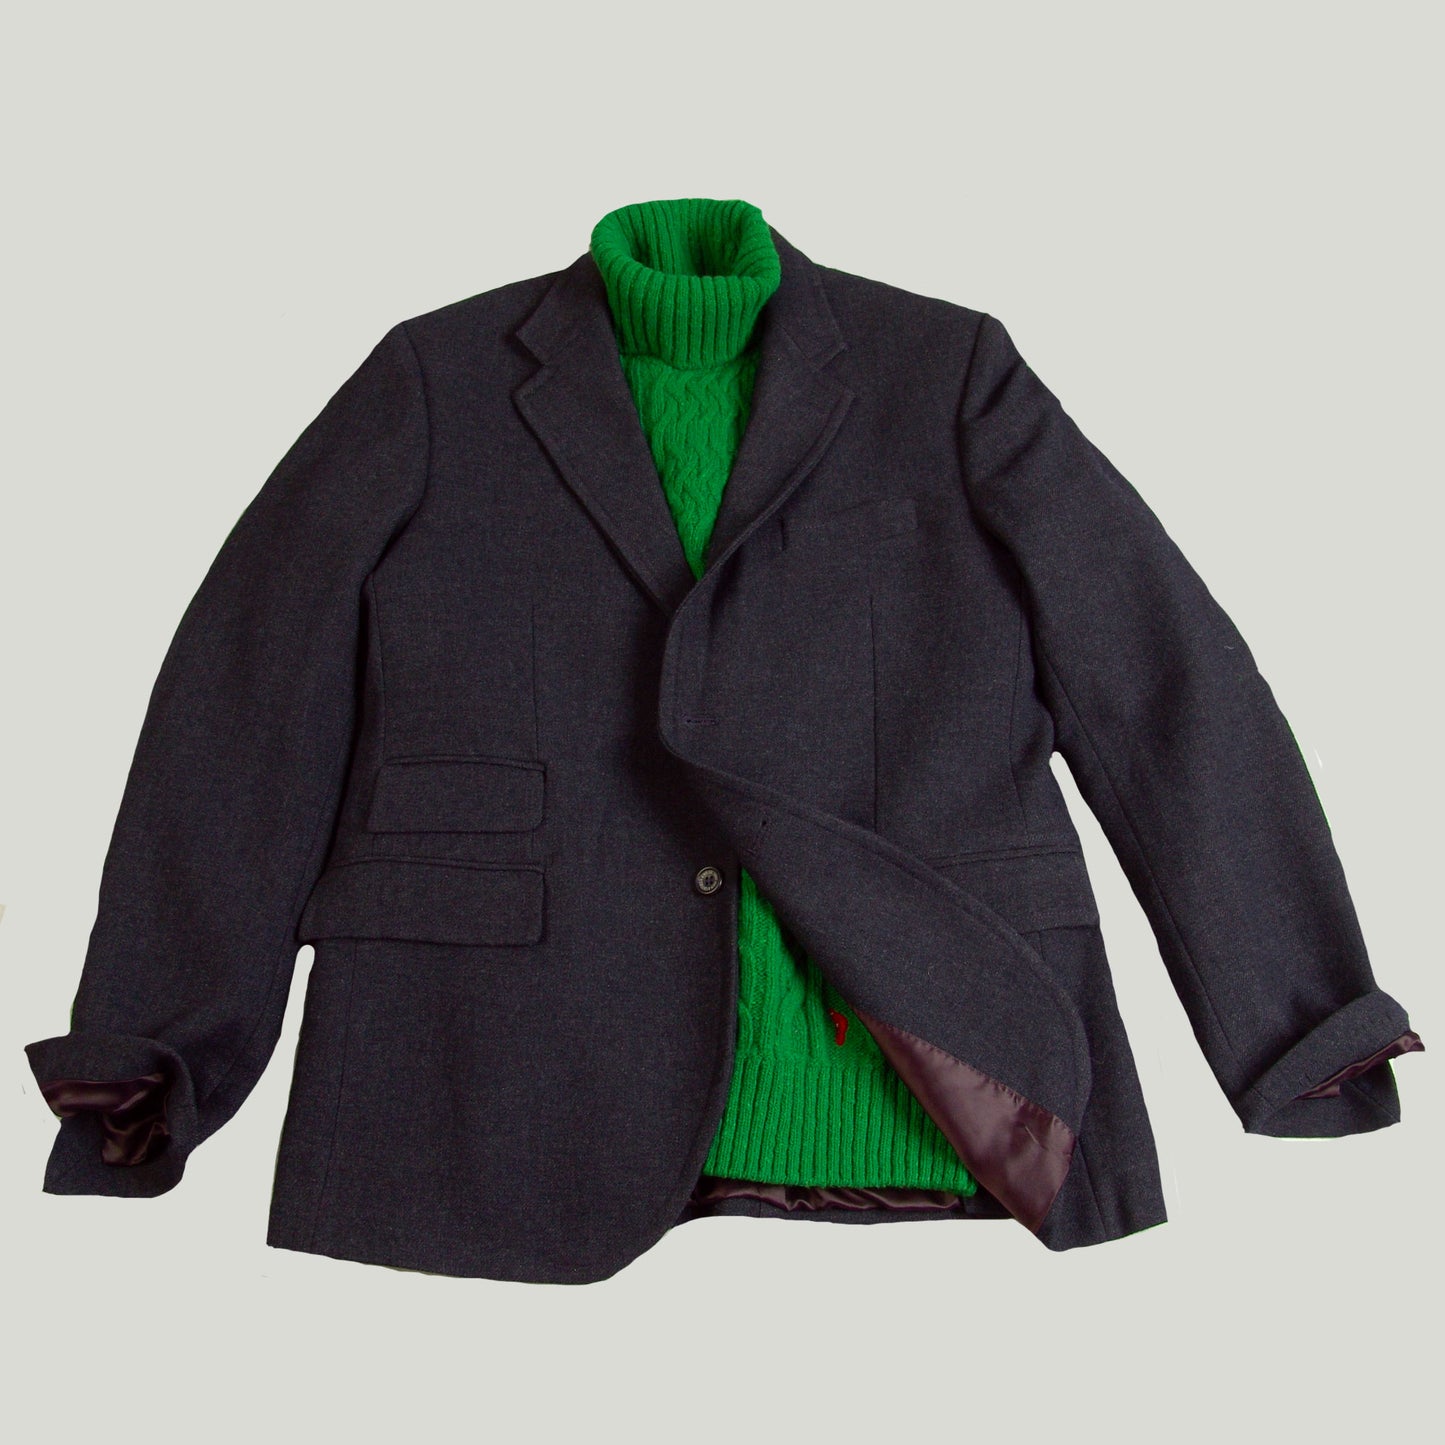 Men's Two-button Jacket with ticket pocket in Wool